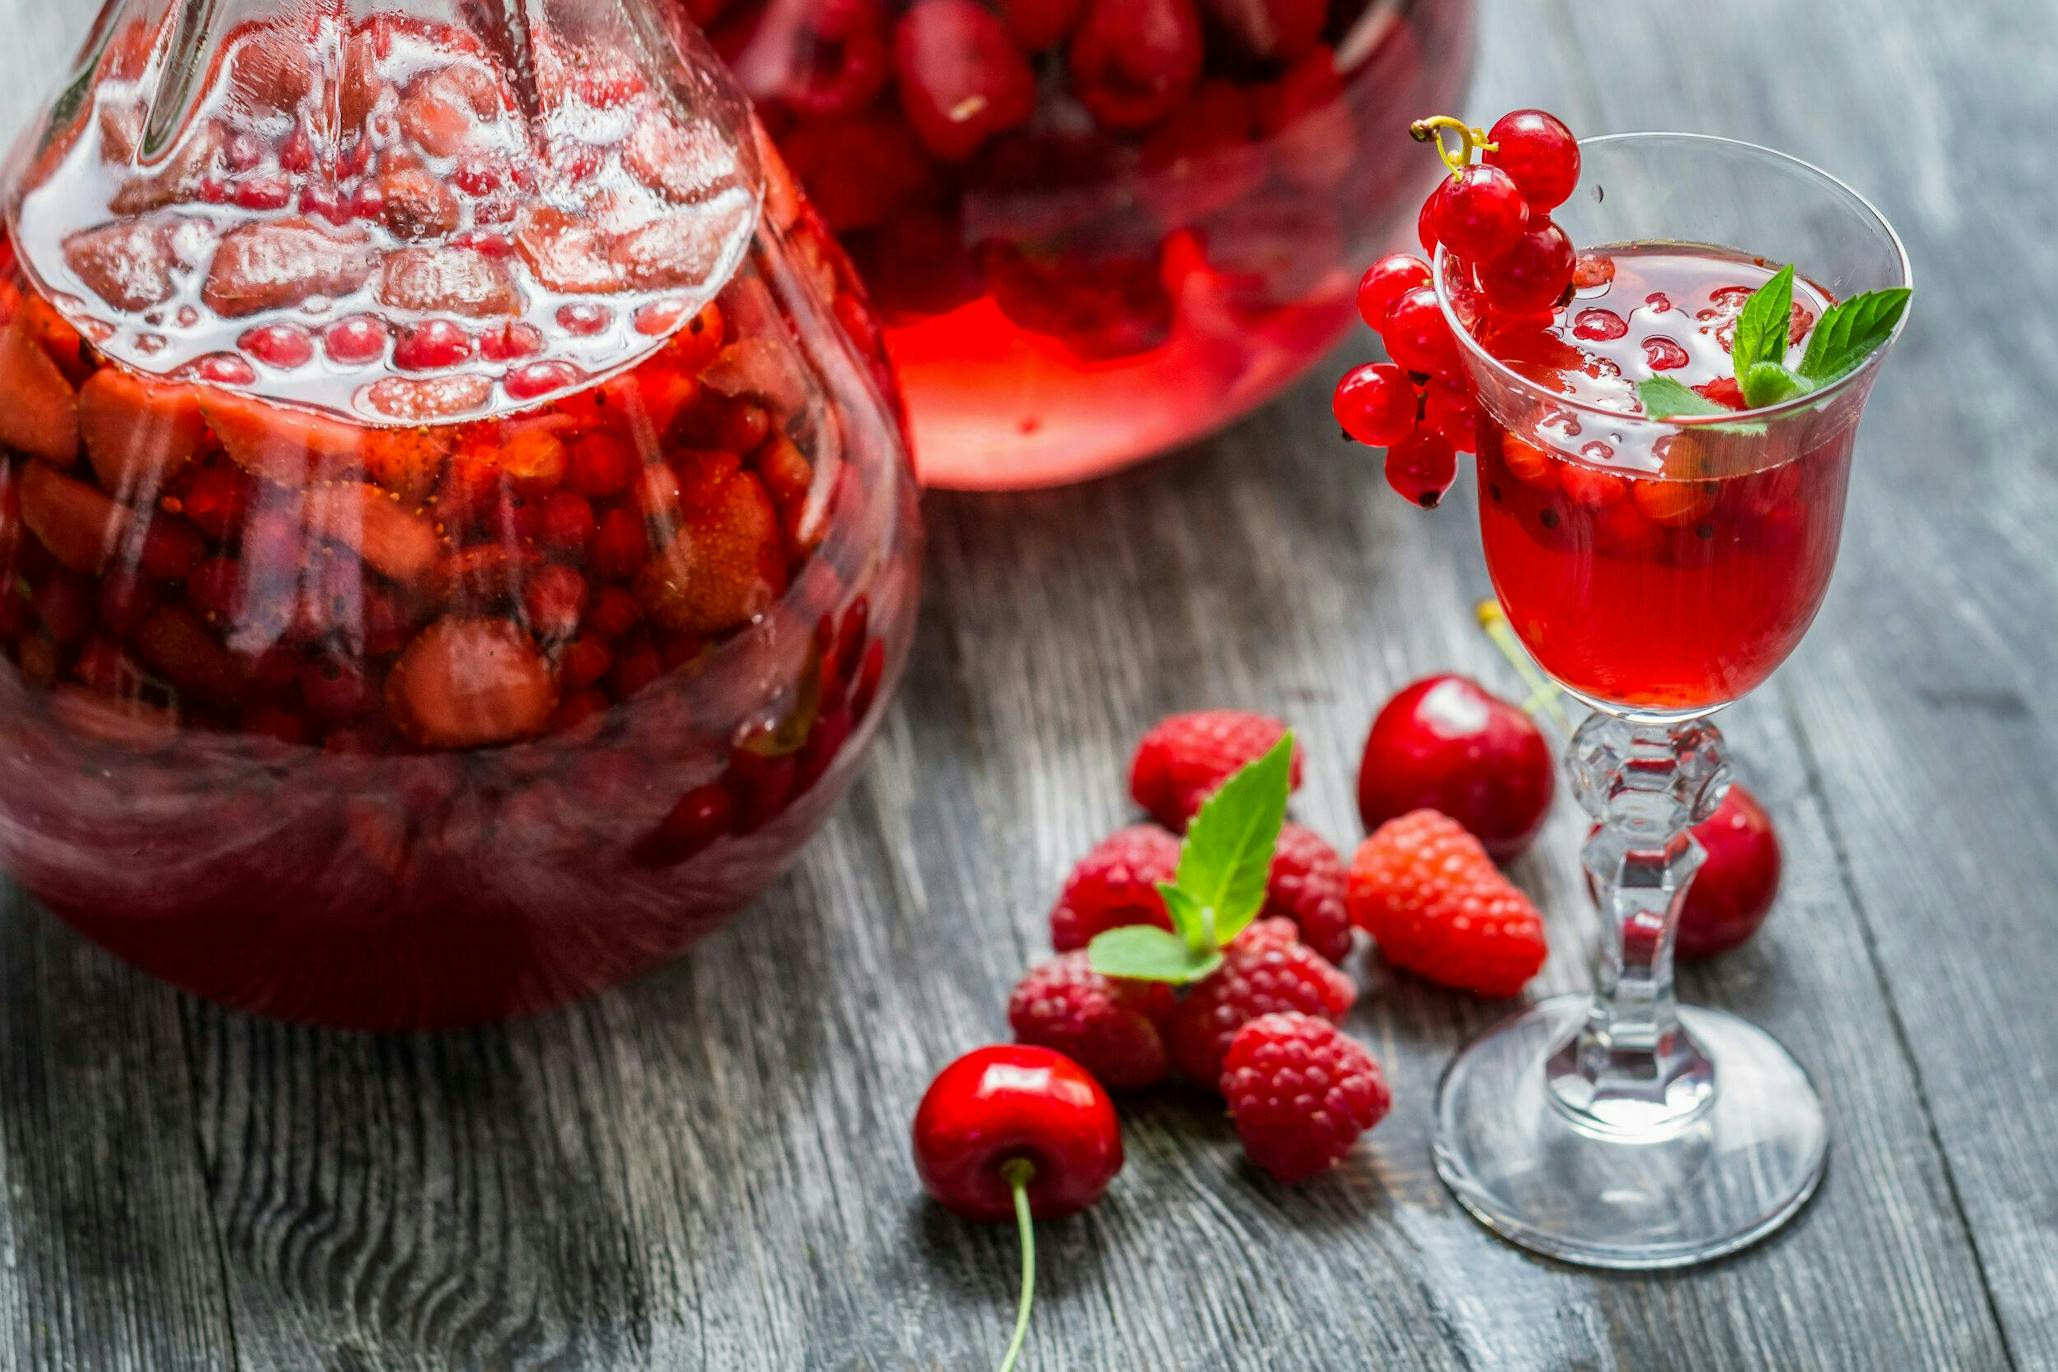 Berry-infused spirits